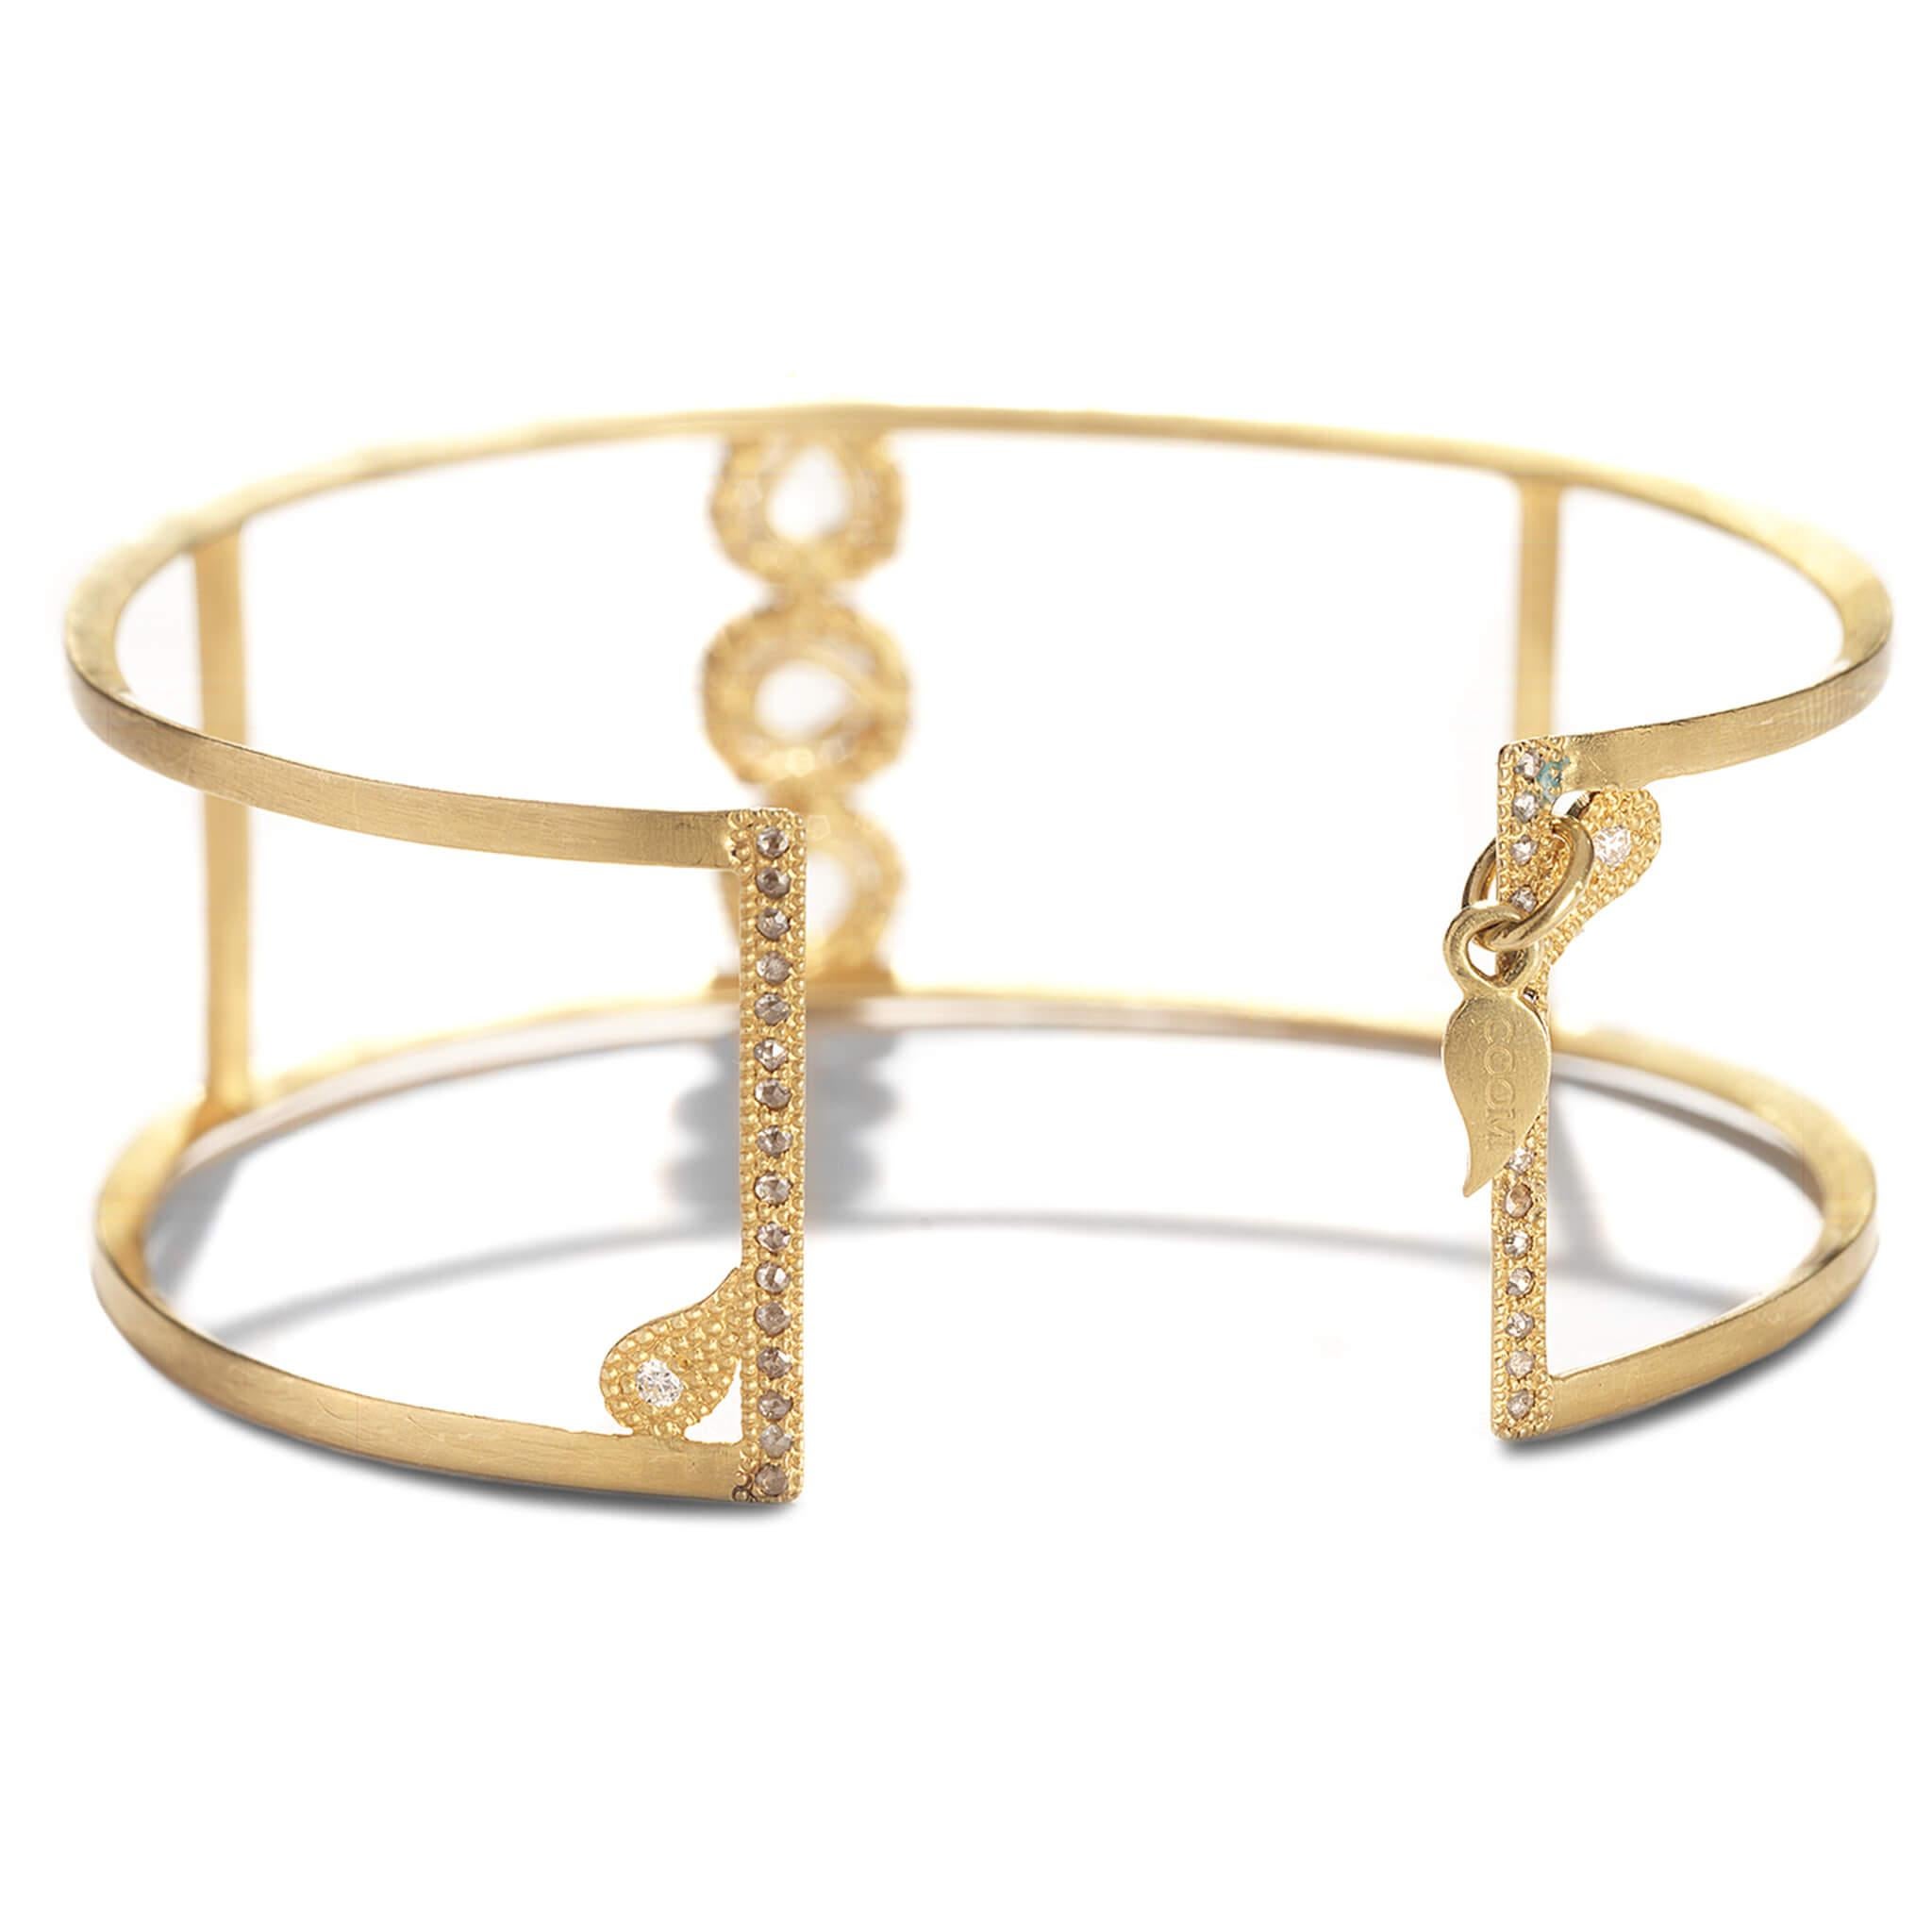 Coomi Luminosity cuff bracelet set in 20K yellow gold with 1.41cts diamonds.

Coomi’s Luminosity Collection consists of bold design and reflects light from within. Each uniquely natural rose cut diamond and diamond slice are chosen by Coomi for the